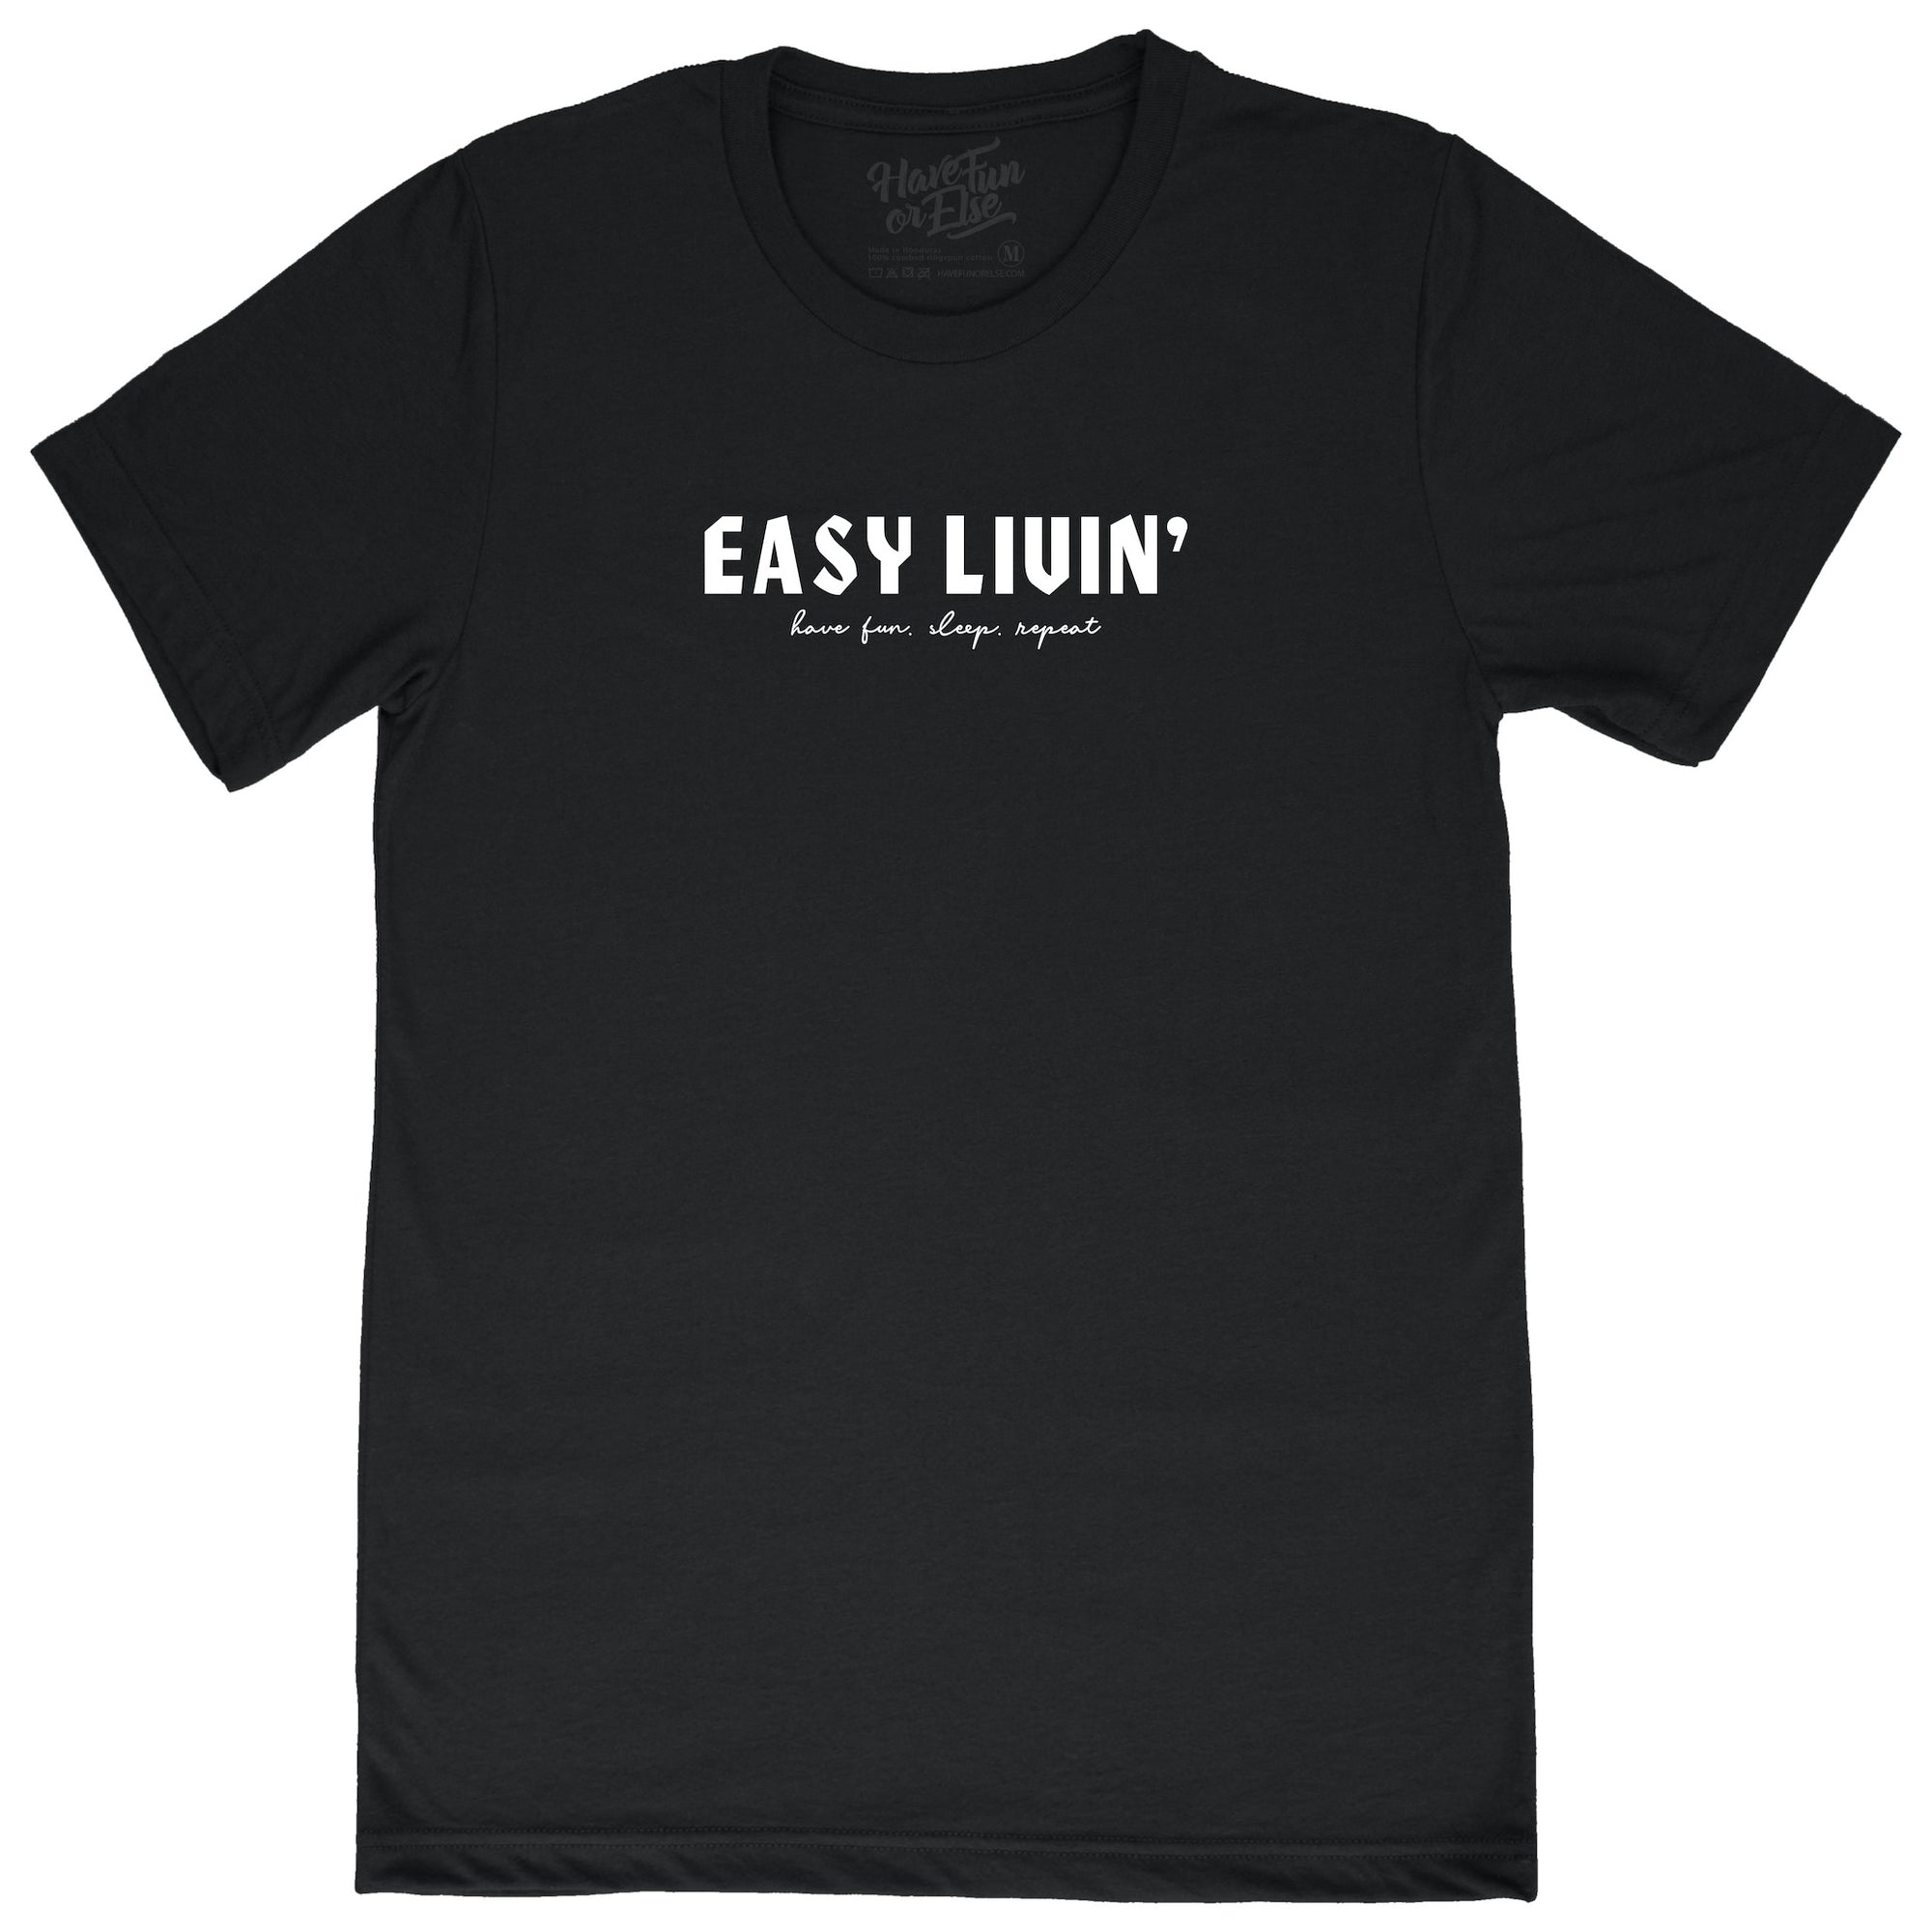 Have Fun Or Else Easy Livin' black tee, front